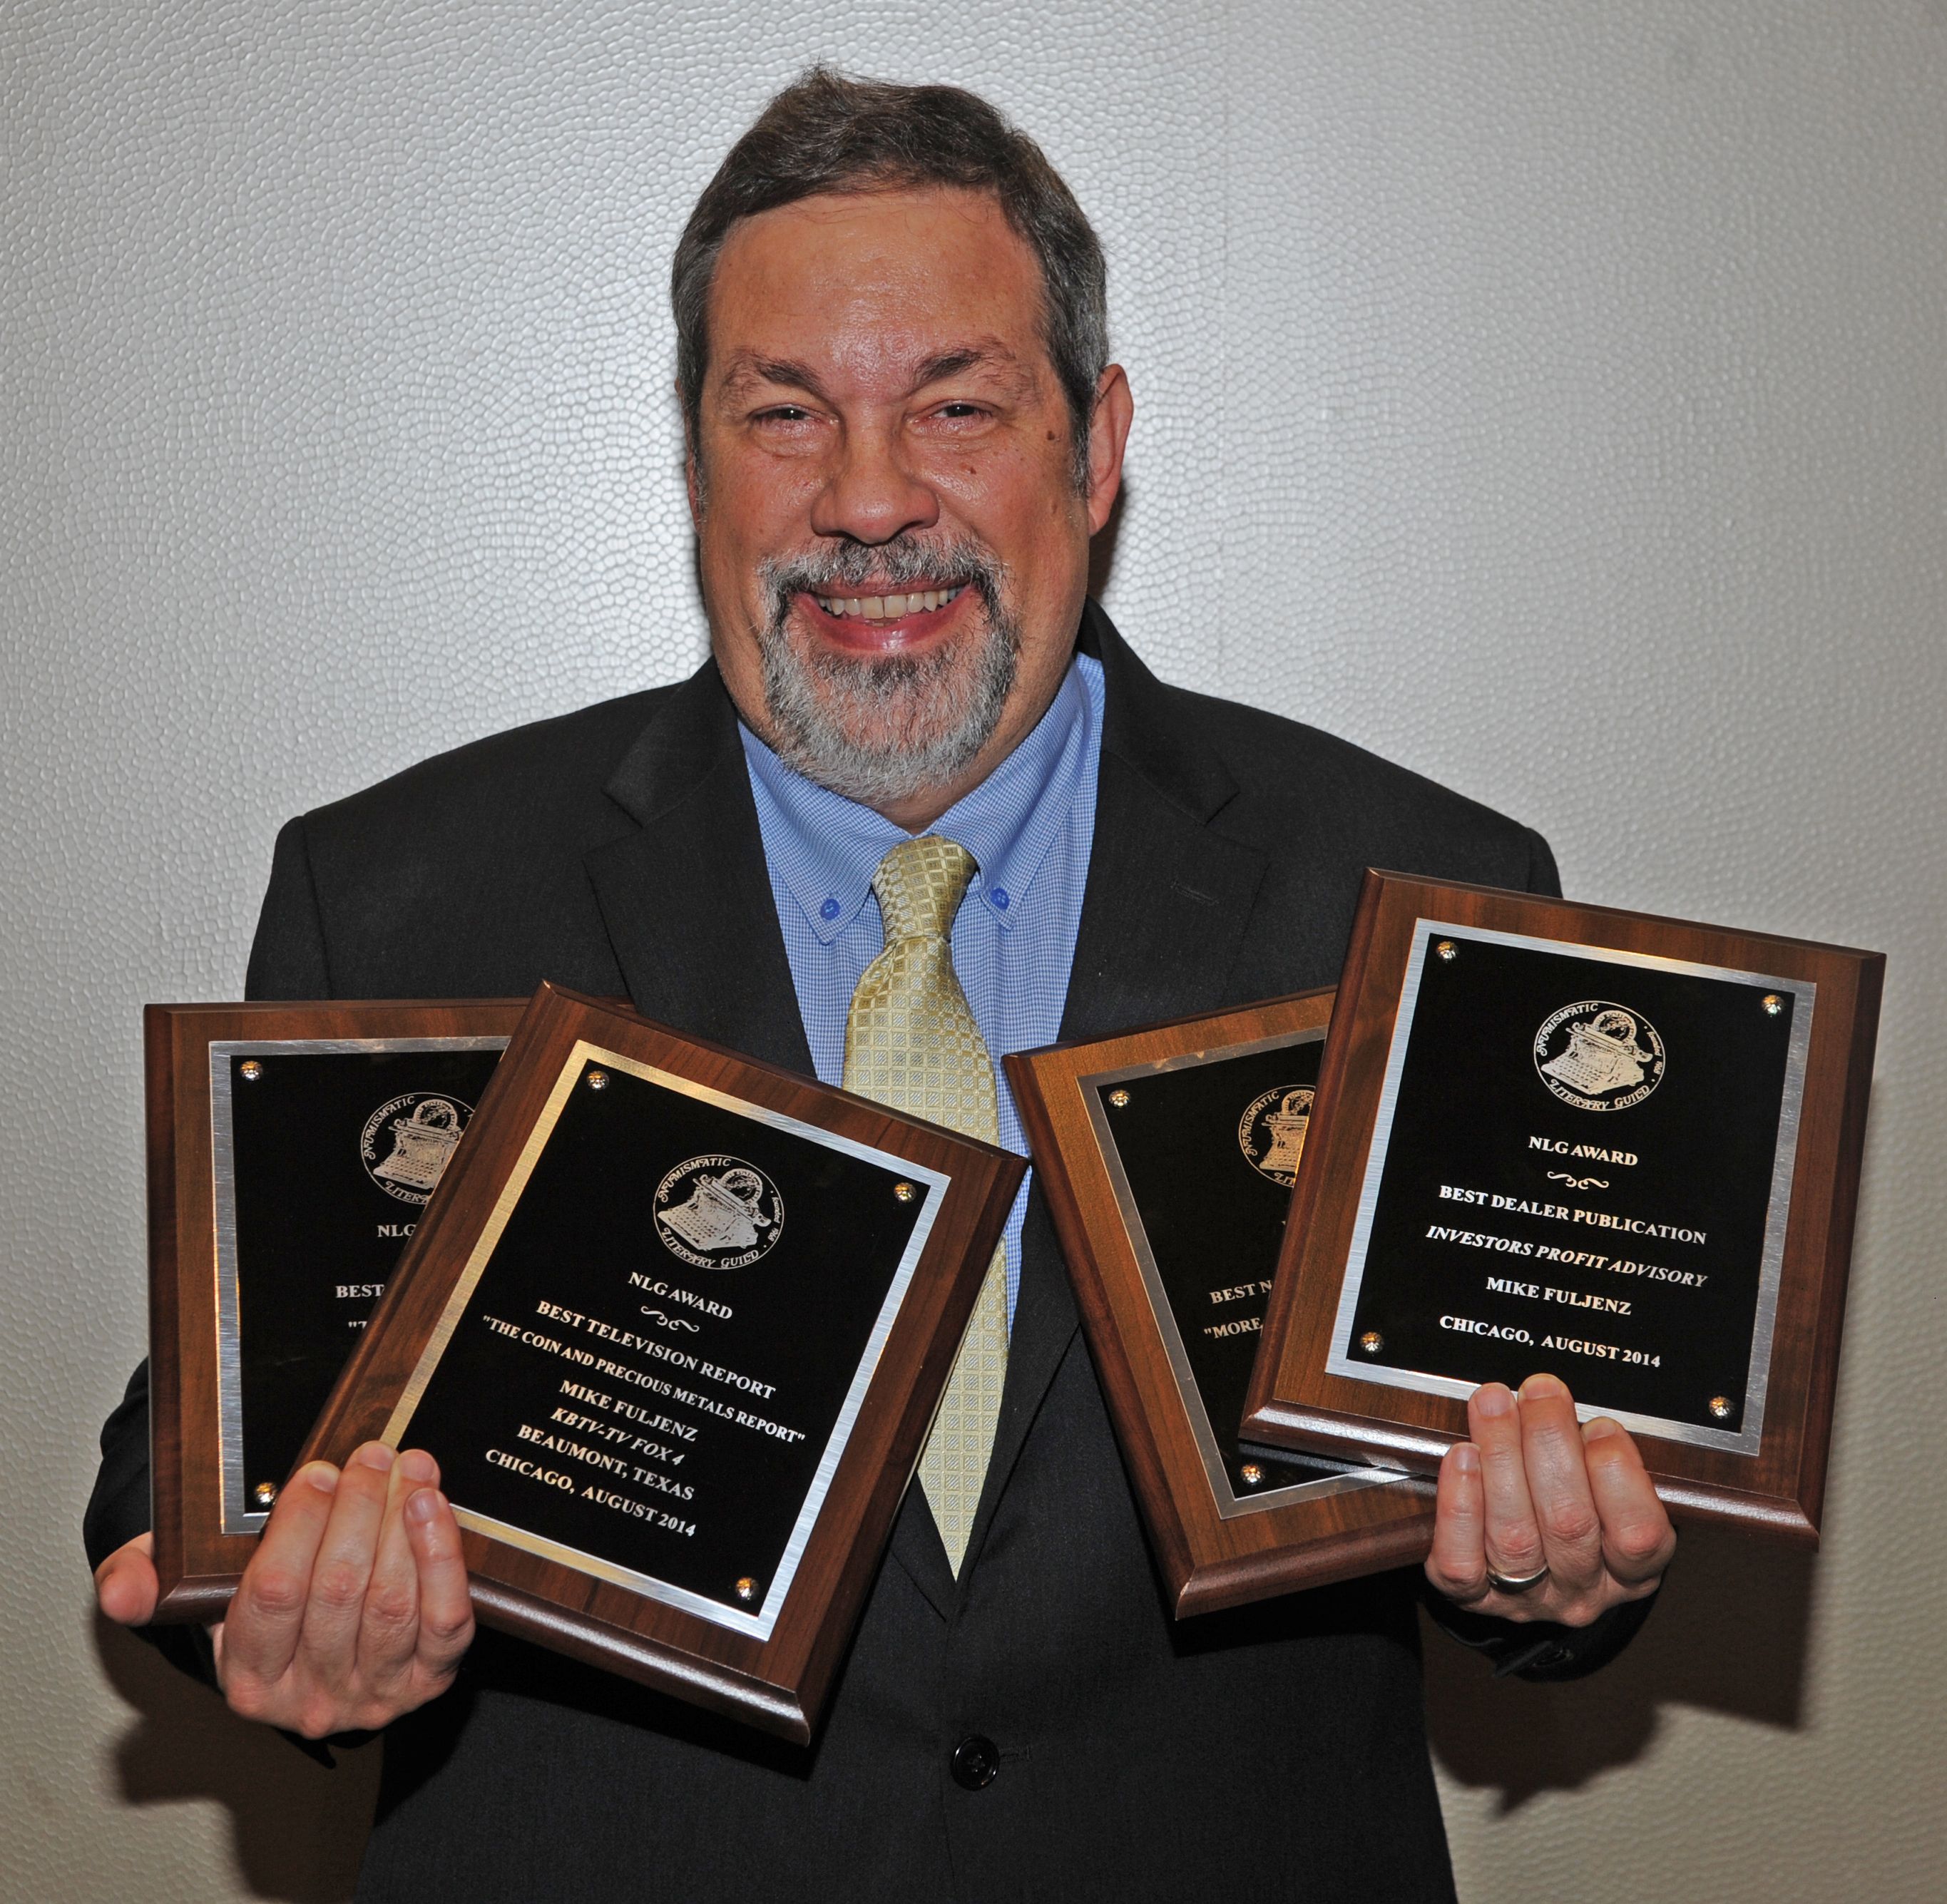 Mike Fuljenz at the 2014 Chicago NLG awards ceremony.